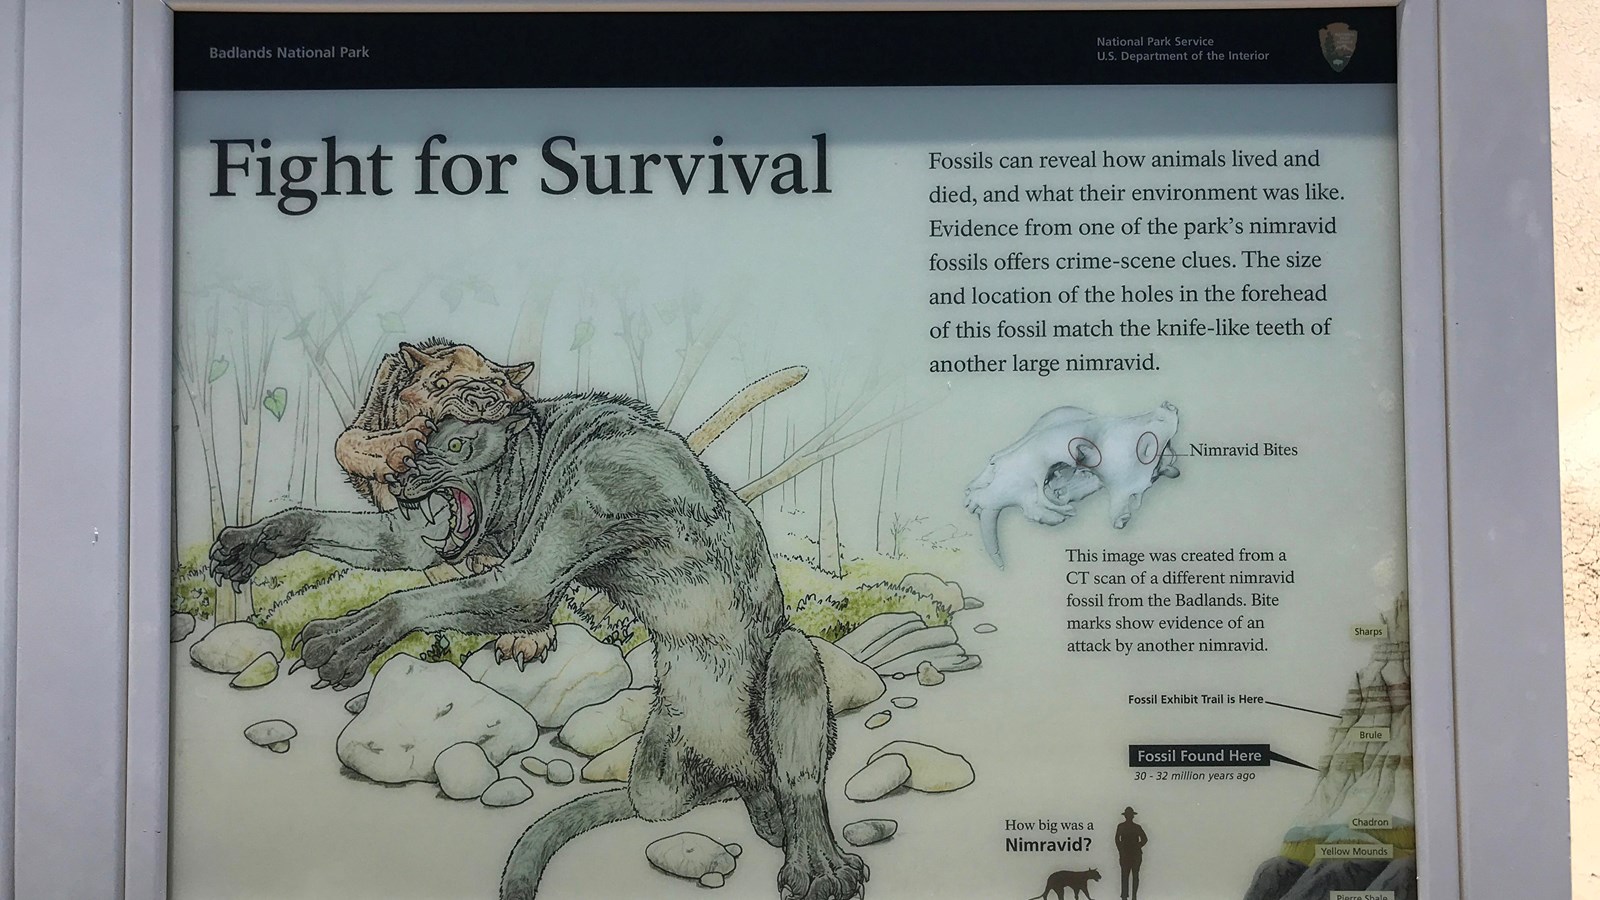 an infographic at a museum depicting an illustration of a fight getween two cat-like creatures in nature. text on the sign reads: 'fossils can reveal how animals lived and died, and what their environment was like. evidence from one of the park's nimravid fossils offers crime-sene clues. the size and location of the holes in the forehead of this fossil match the knife-like teeth of another large nimravid.' it shows an illustration of a skull and below that reads: 'this image was created from a ct scan of a different nimravid fossil from the badlands. bite marks show evidence of an attack by another nimravid.''